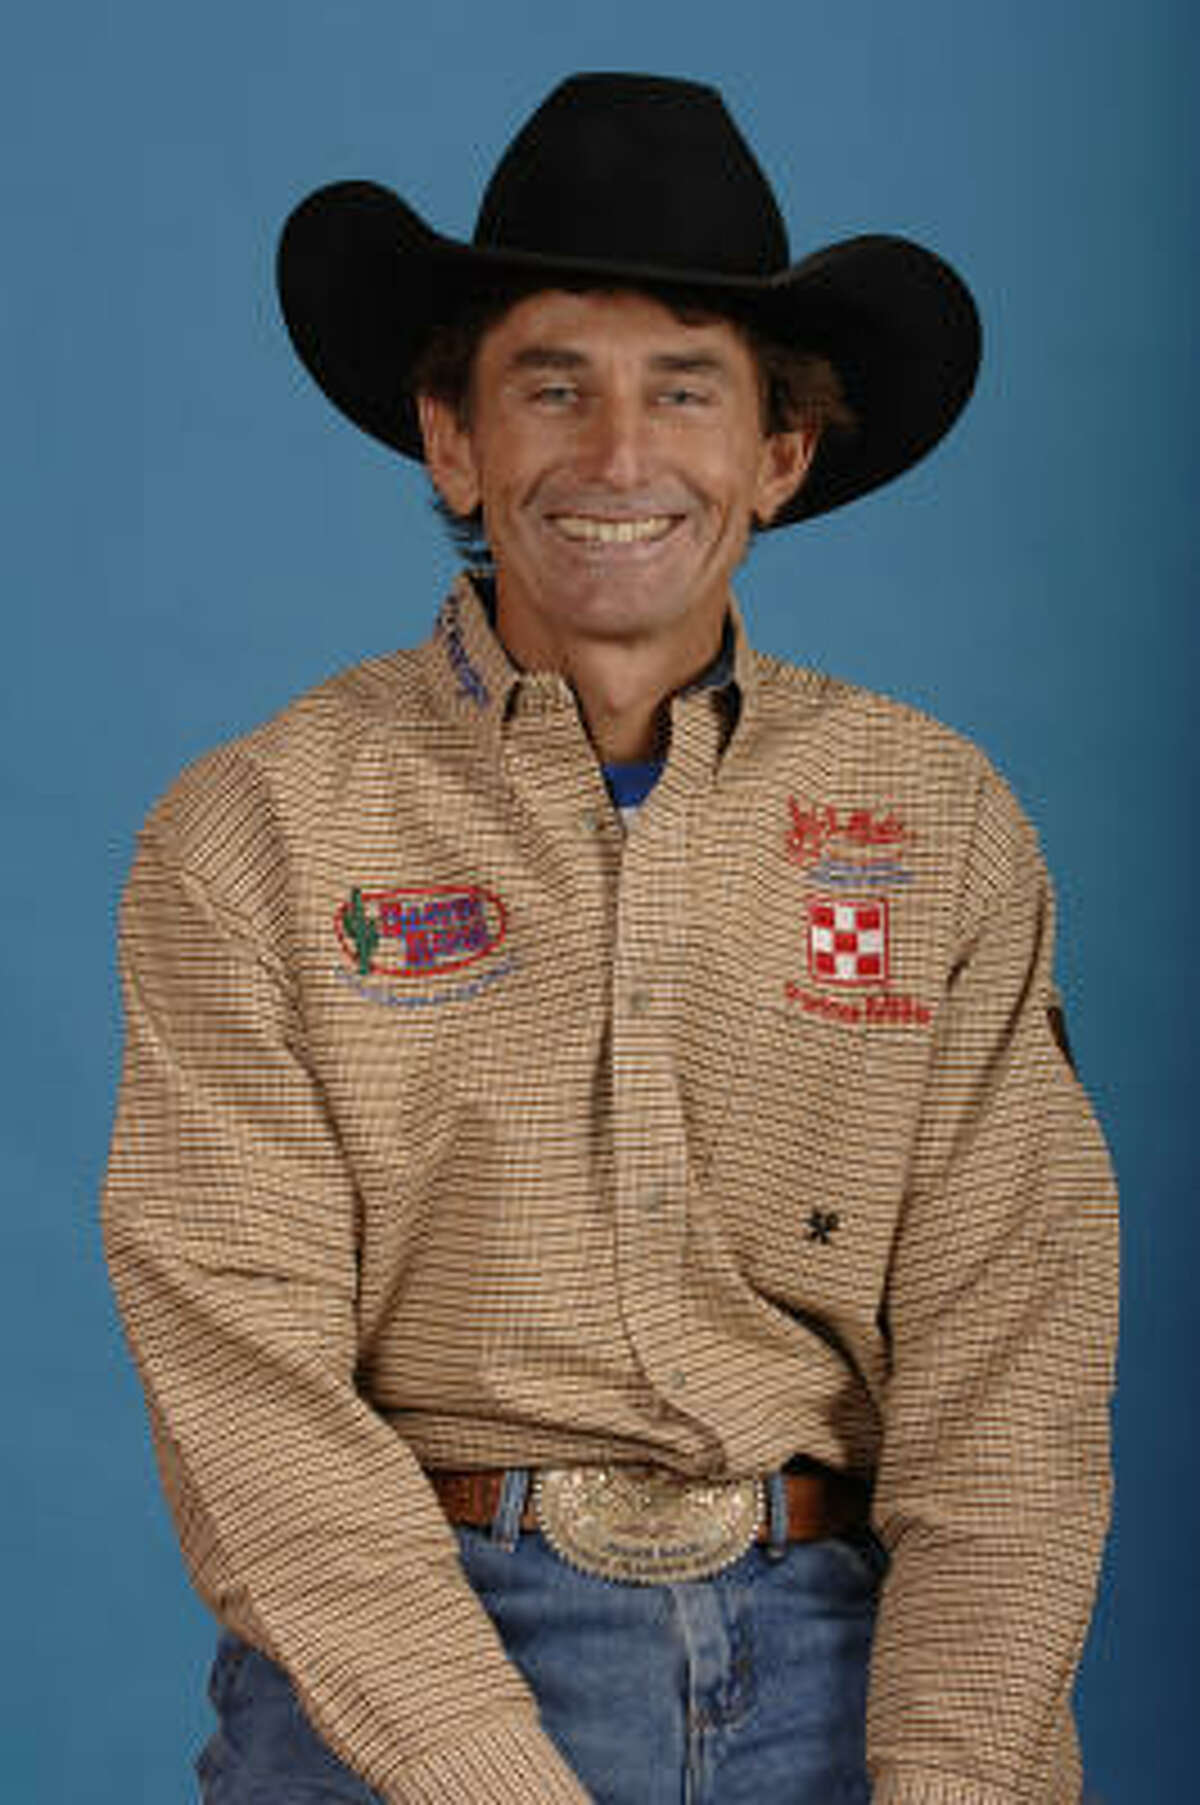 Allen Bach This roper is a veteran. He’s won more than $2 million in prize money since he joined the Professional Rodeo Cowboys Association in 1978 and has been a regular at the National Finals Rodeo. This year, he is roping with his 21-year-old son, Joel. In this pairing, the young Bach ropes the head of the calf and Dad handles the feet. As of mid-February, the father and son duo was making waves and money in the rodeo arena.